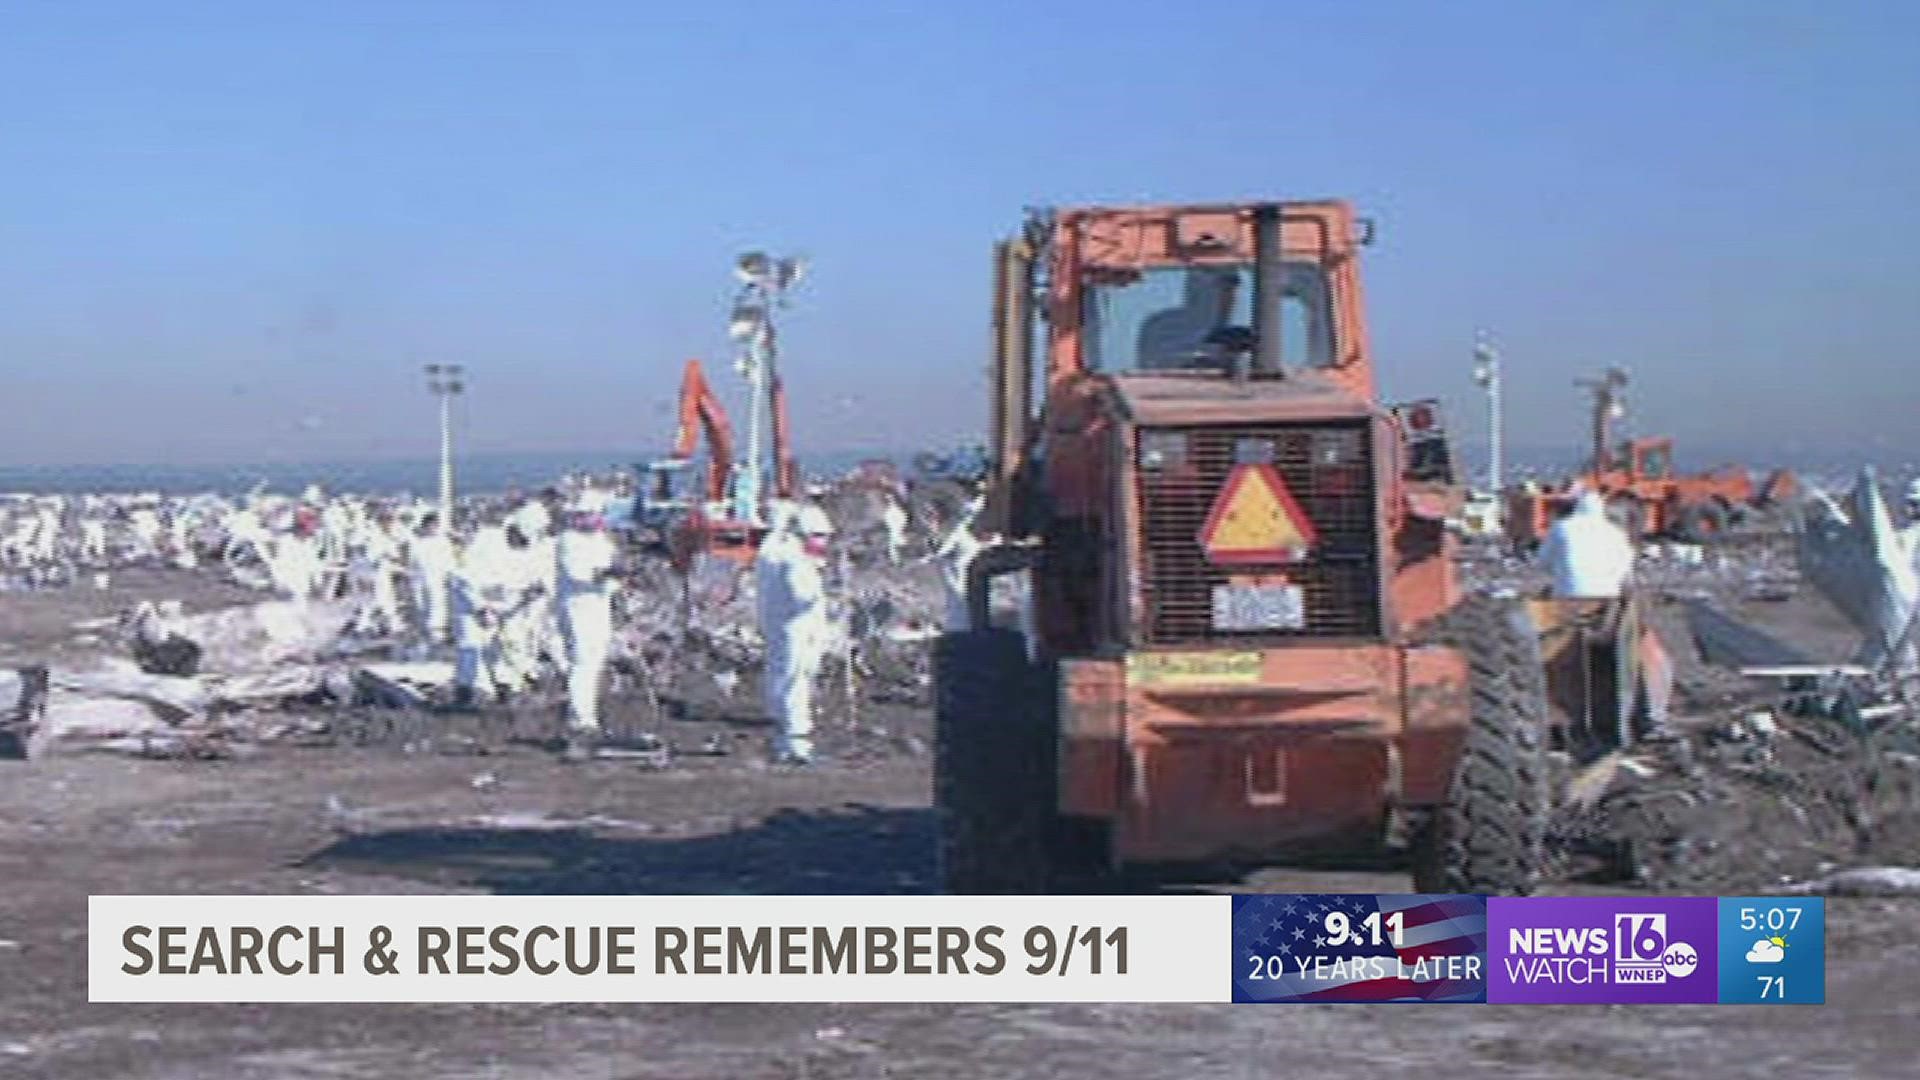 More than 300 volunteers and K-9s searched through rubble from the towers that were trucked into the Freshkill Landfill in Staten Island.